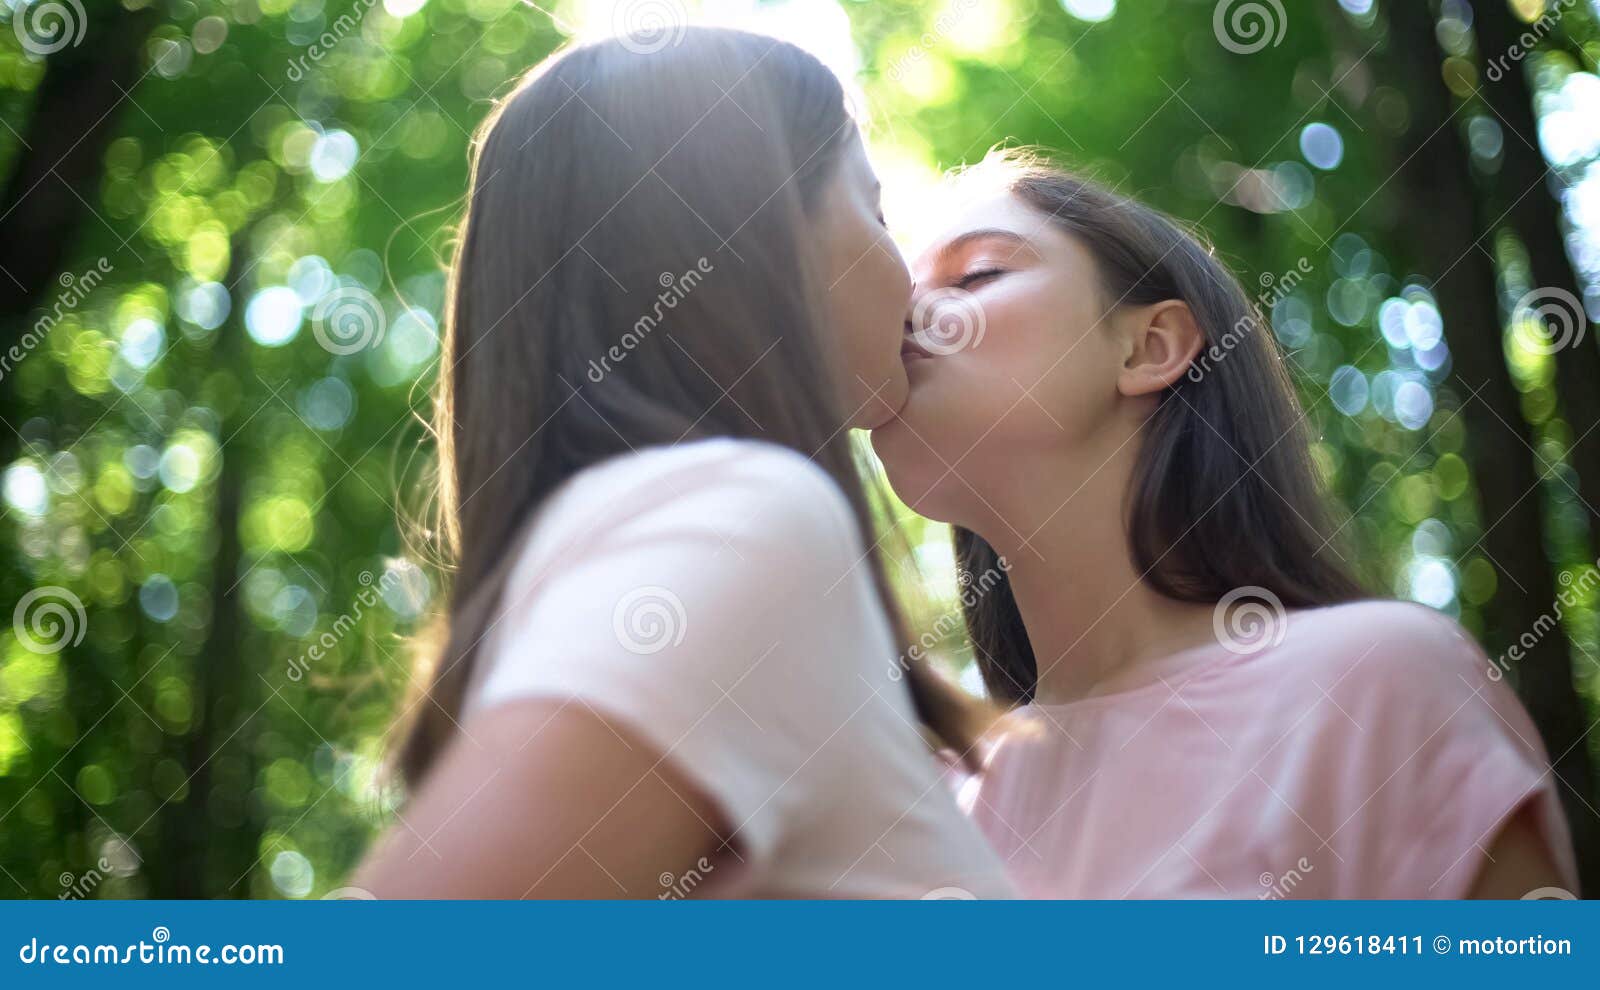 Lesbian Couple Kissing Passionately, Same Sex Marriage Happiness, Lgbt Rights Stock Image photo